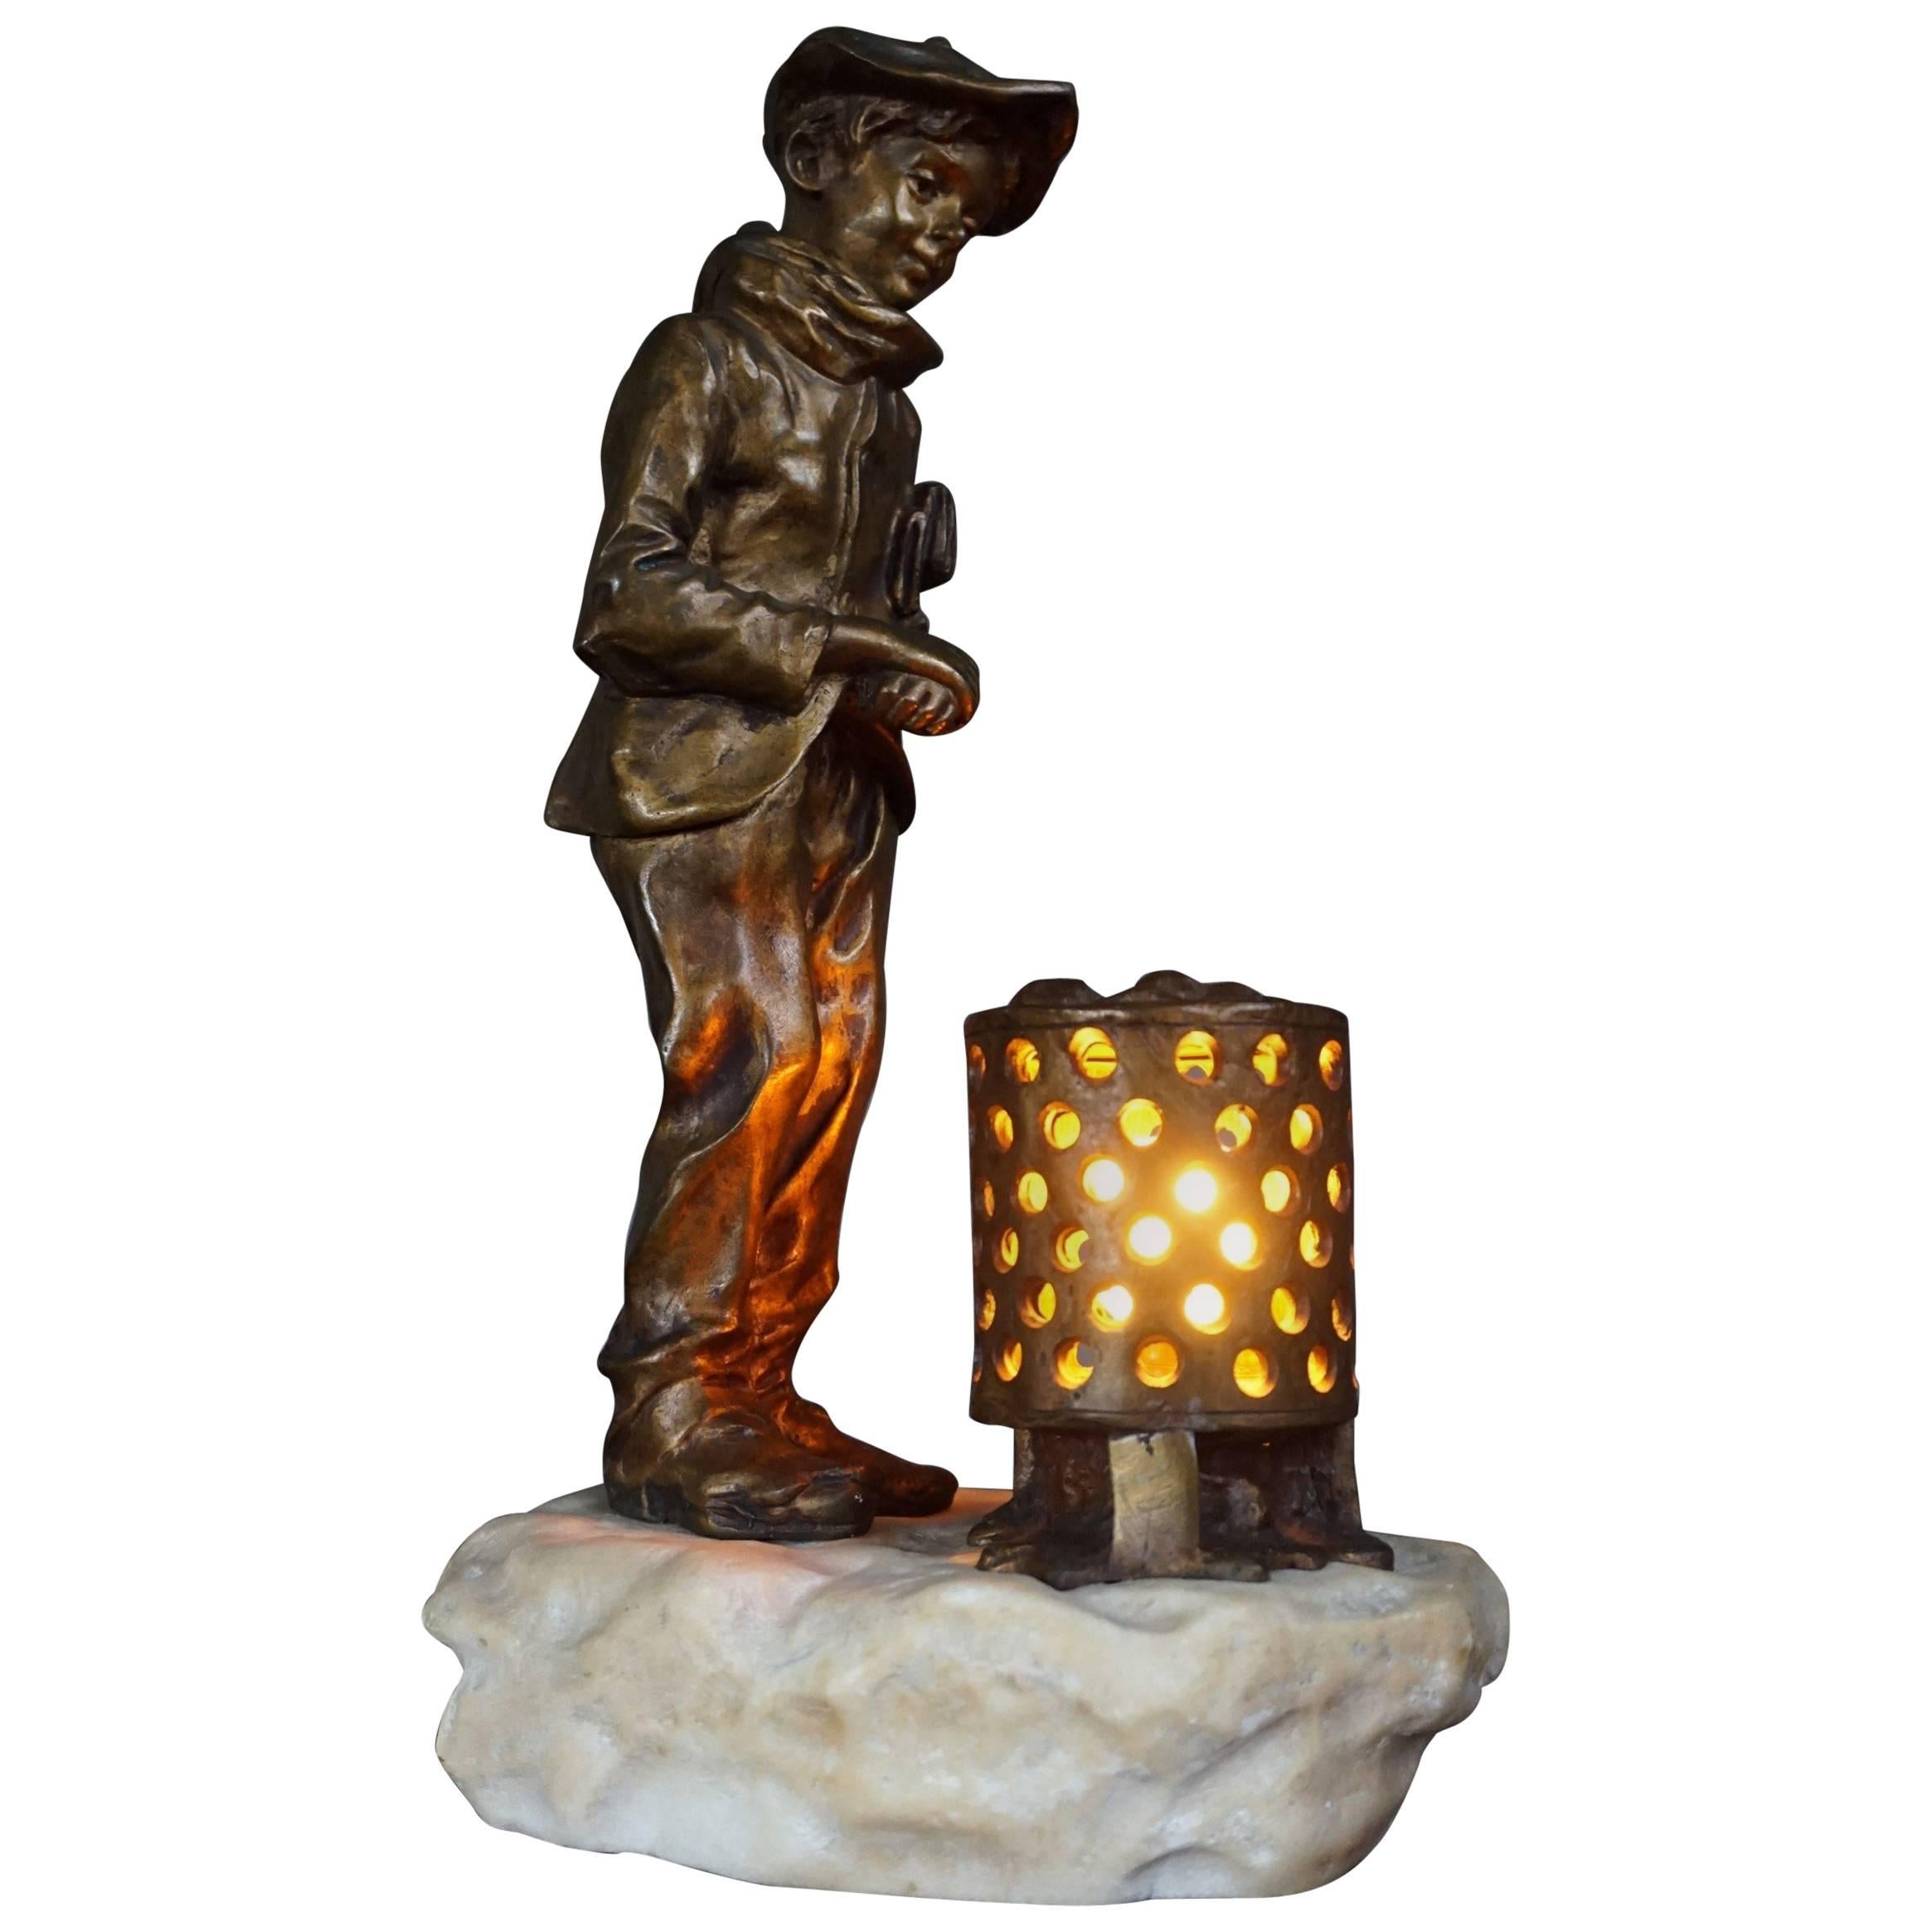 Antique and Signed Gilt Bronze Boy with Newspaper by the Fire Table or Desk Lamp